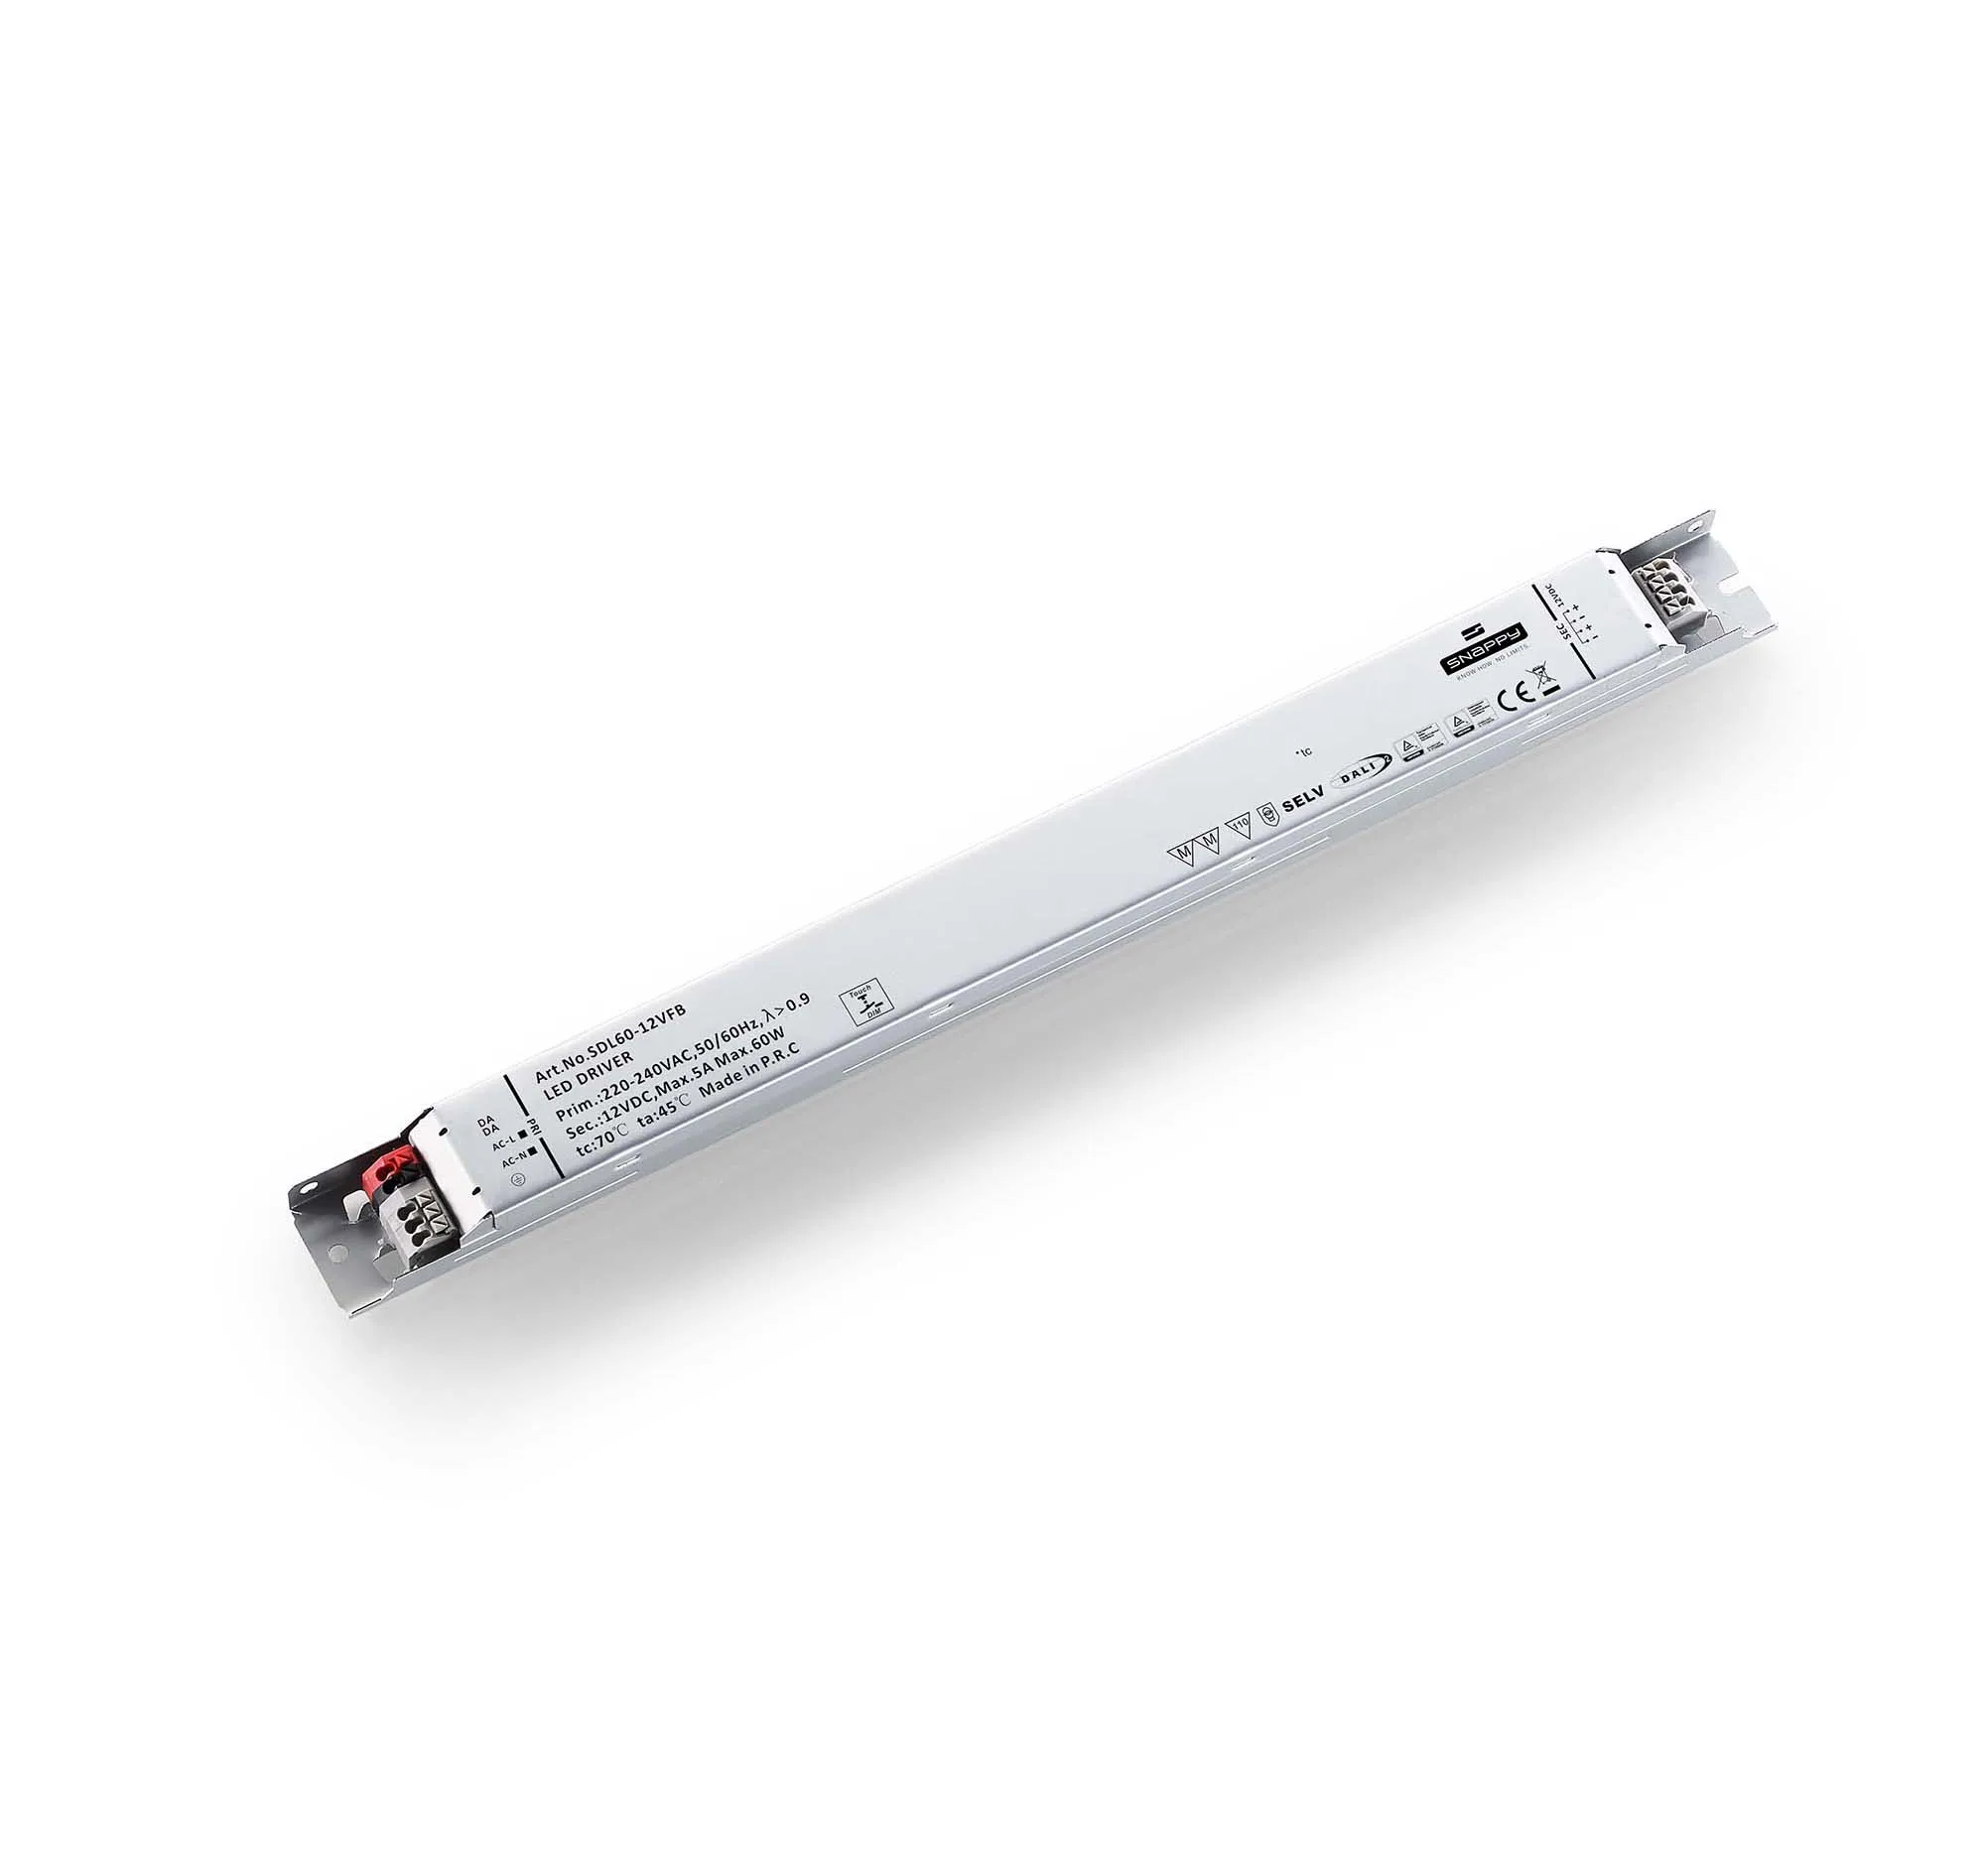 SDL60-24VFB DALI 2 SNAPPY  constant voltage24V  dimmable LED driver